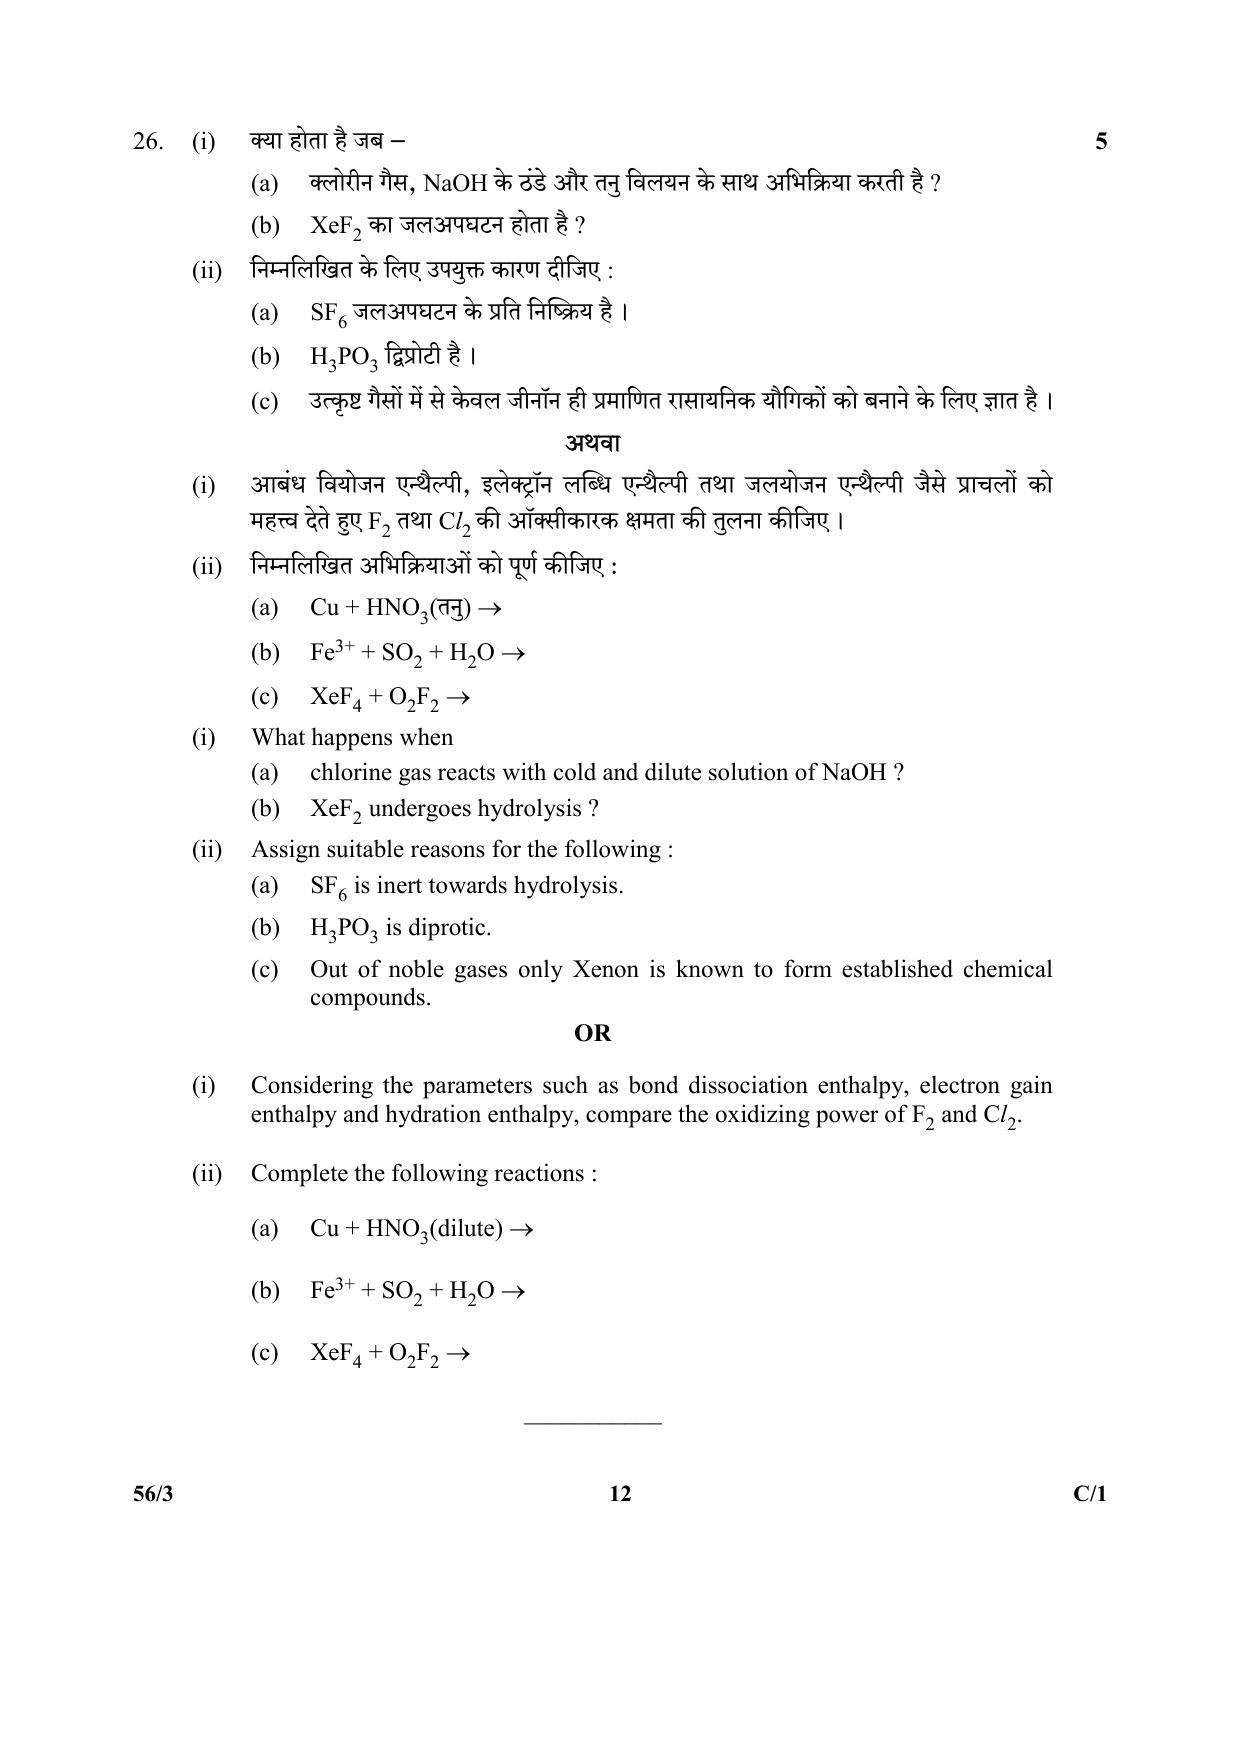 CBSE Class 12 56-3 (Chemistry) 2018 Compartment Question Paper - Page 12